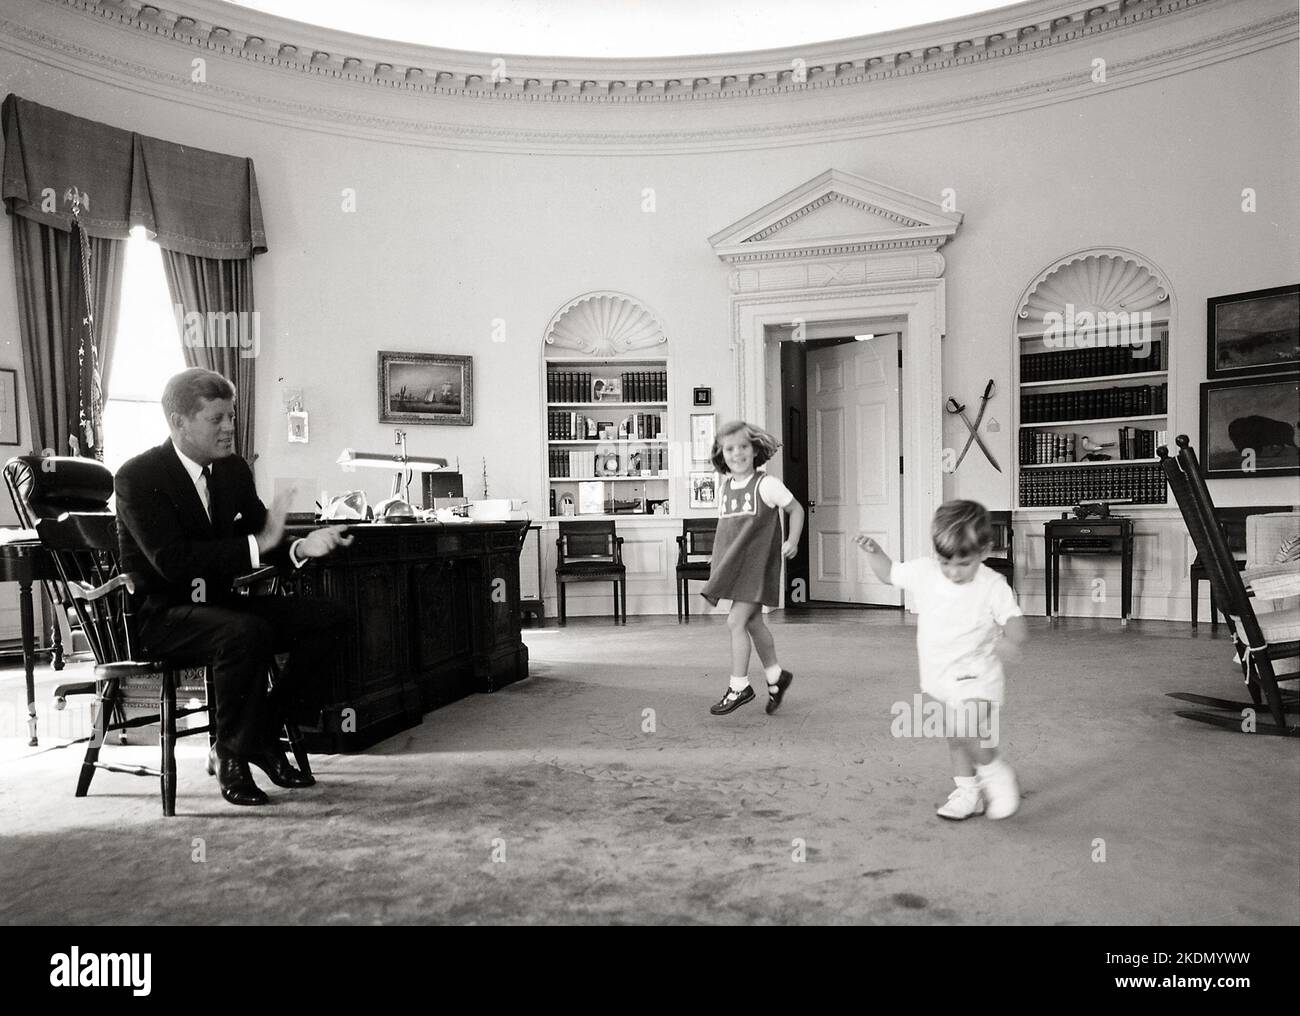 Kennedy children visit the Oval Office, October 1962 - Cecil Stoughton White House Photographer Stock Photo